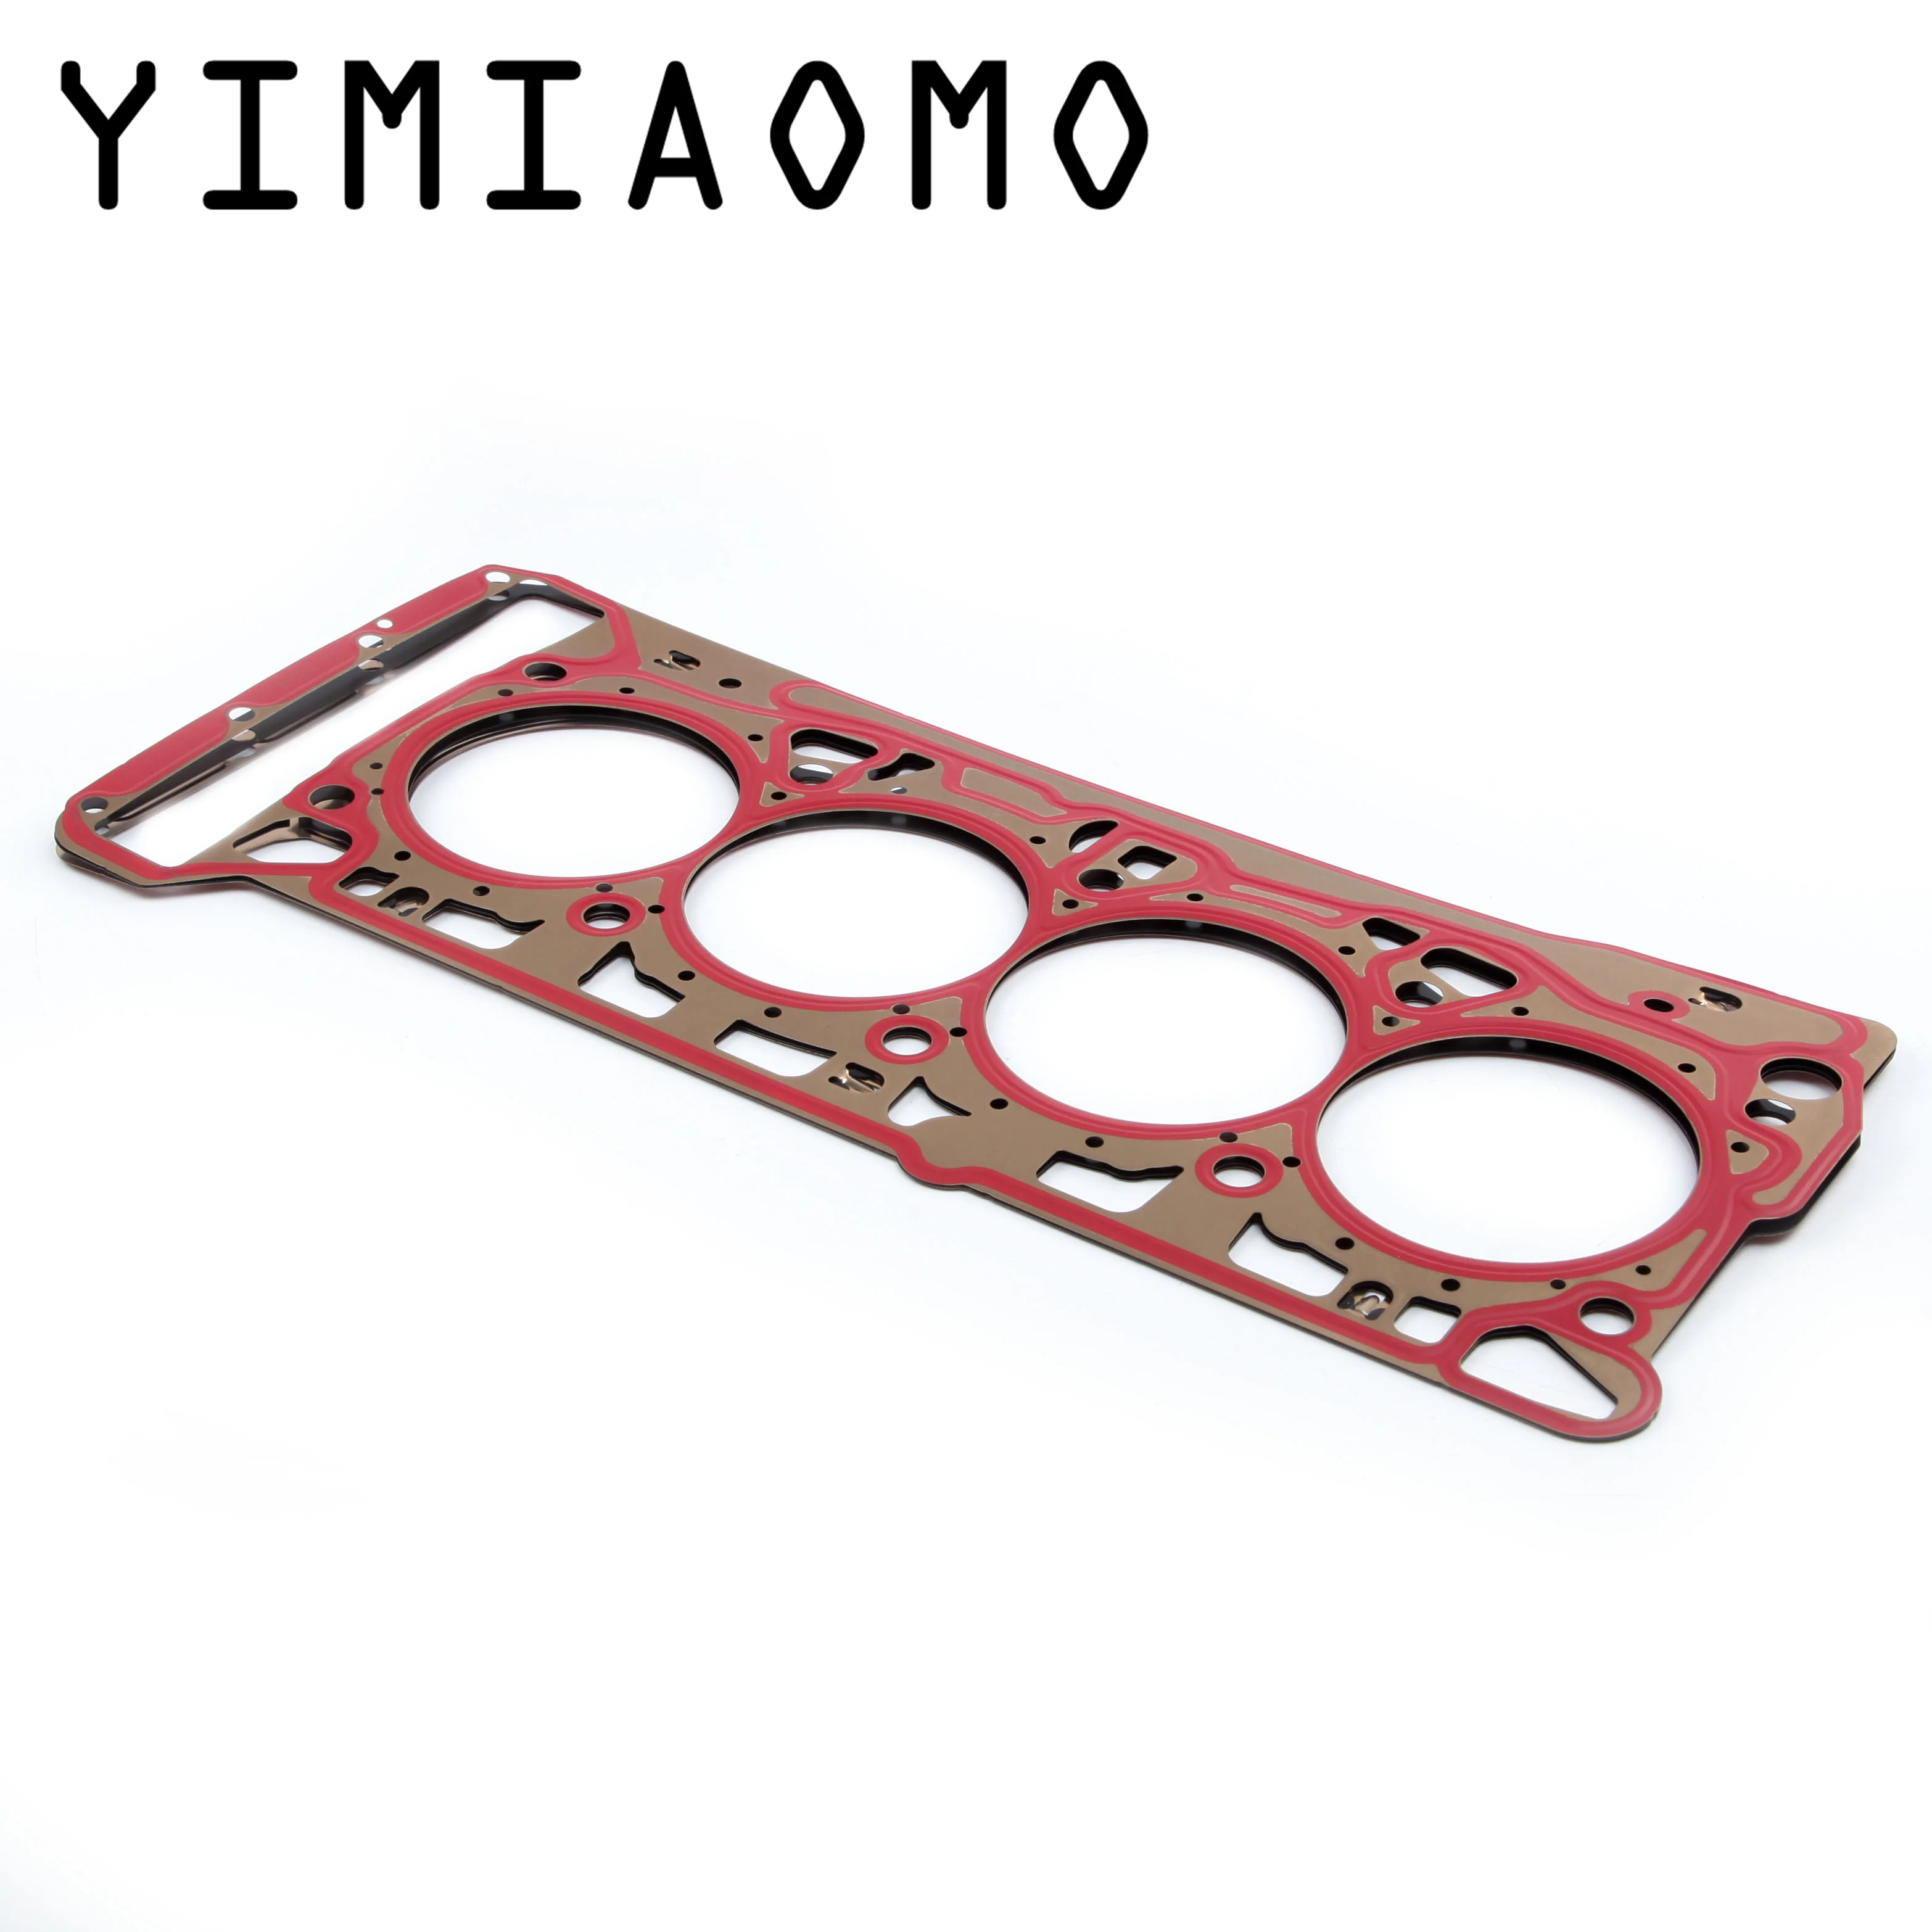 

06K 103 383 K Cylinder Head Gasket For VW Beetle Cabrio Golf Variant Jetta Polo Touran Audi A1 A3 S3 A4 S4 A5 S5 A6 06K103383E